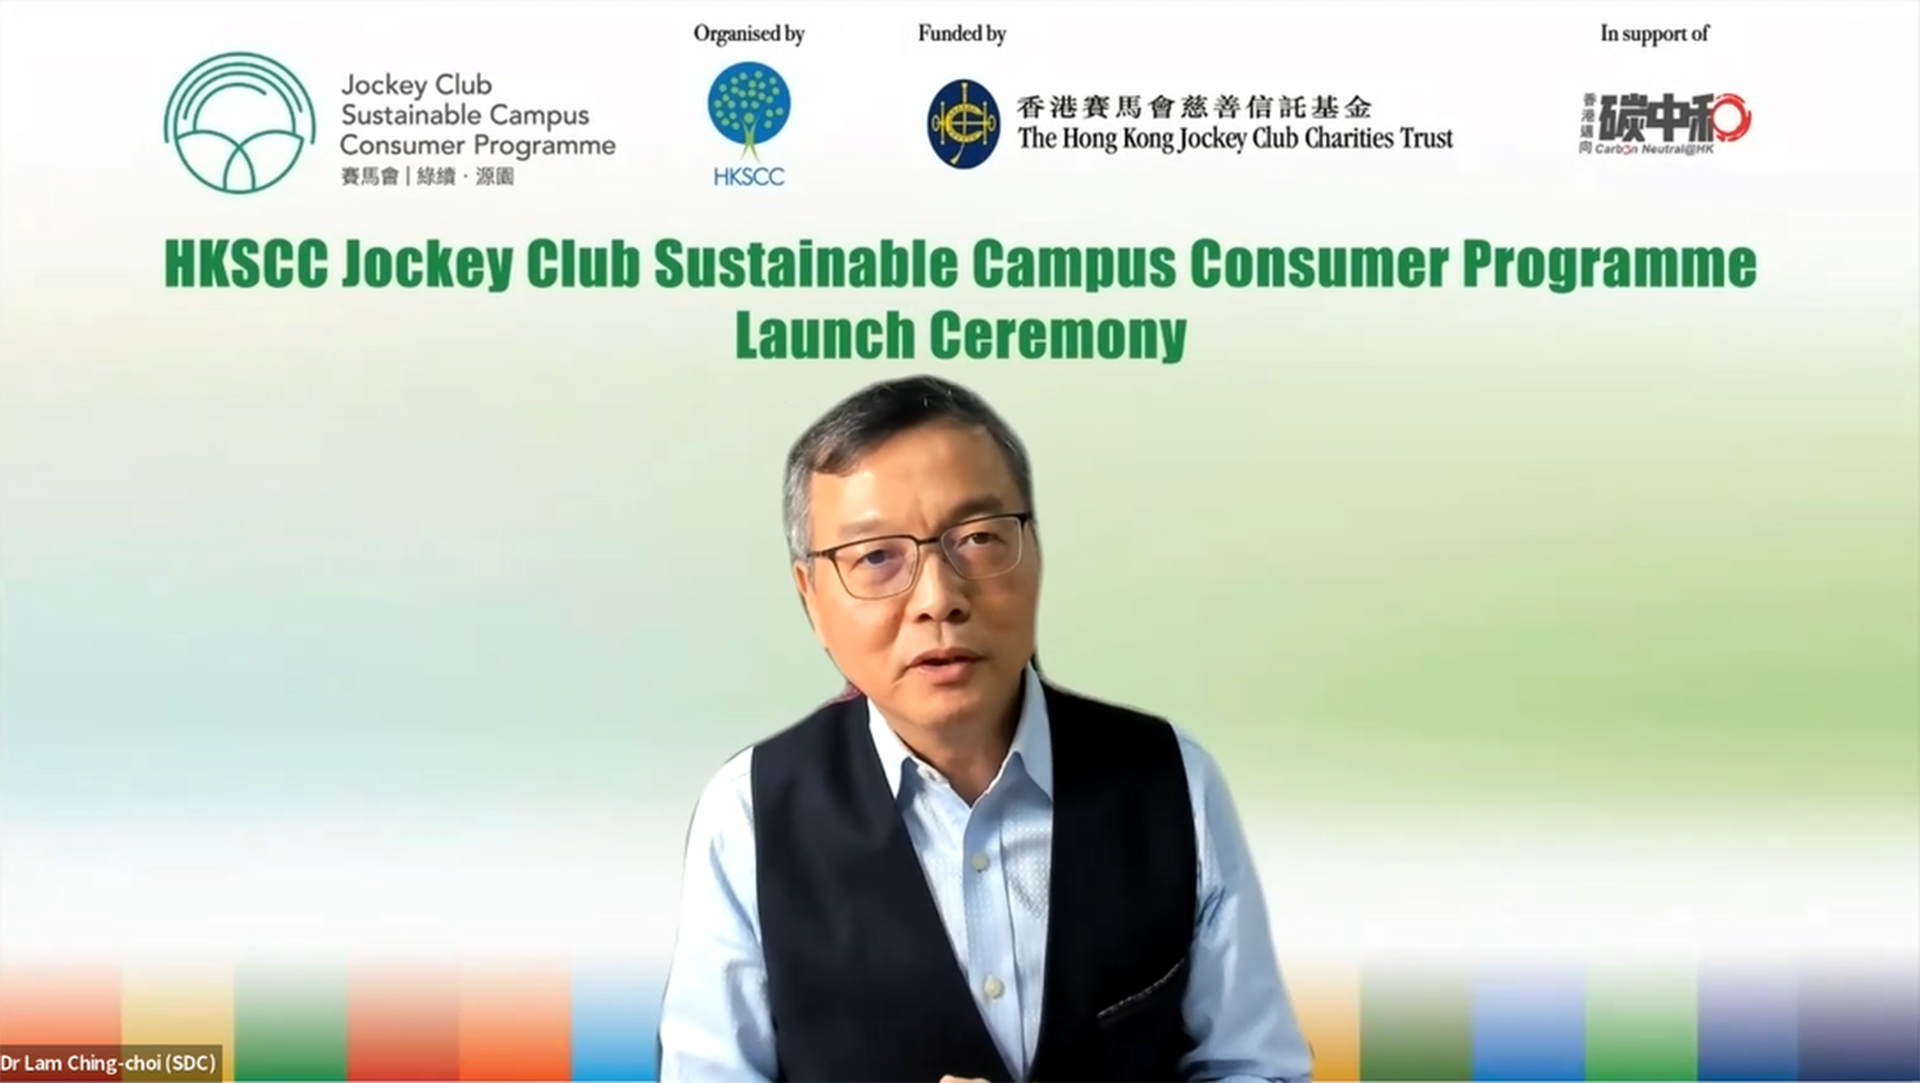 Dr. Lam Ching-choi, Chairman of the Council for Sustainable Development and Guest of Honour, delivers a speech at the Programme’s launch ceremony.